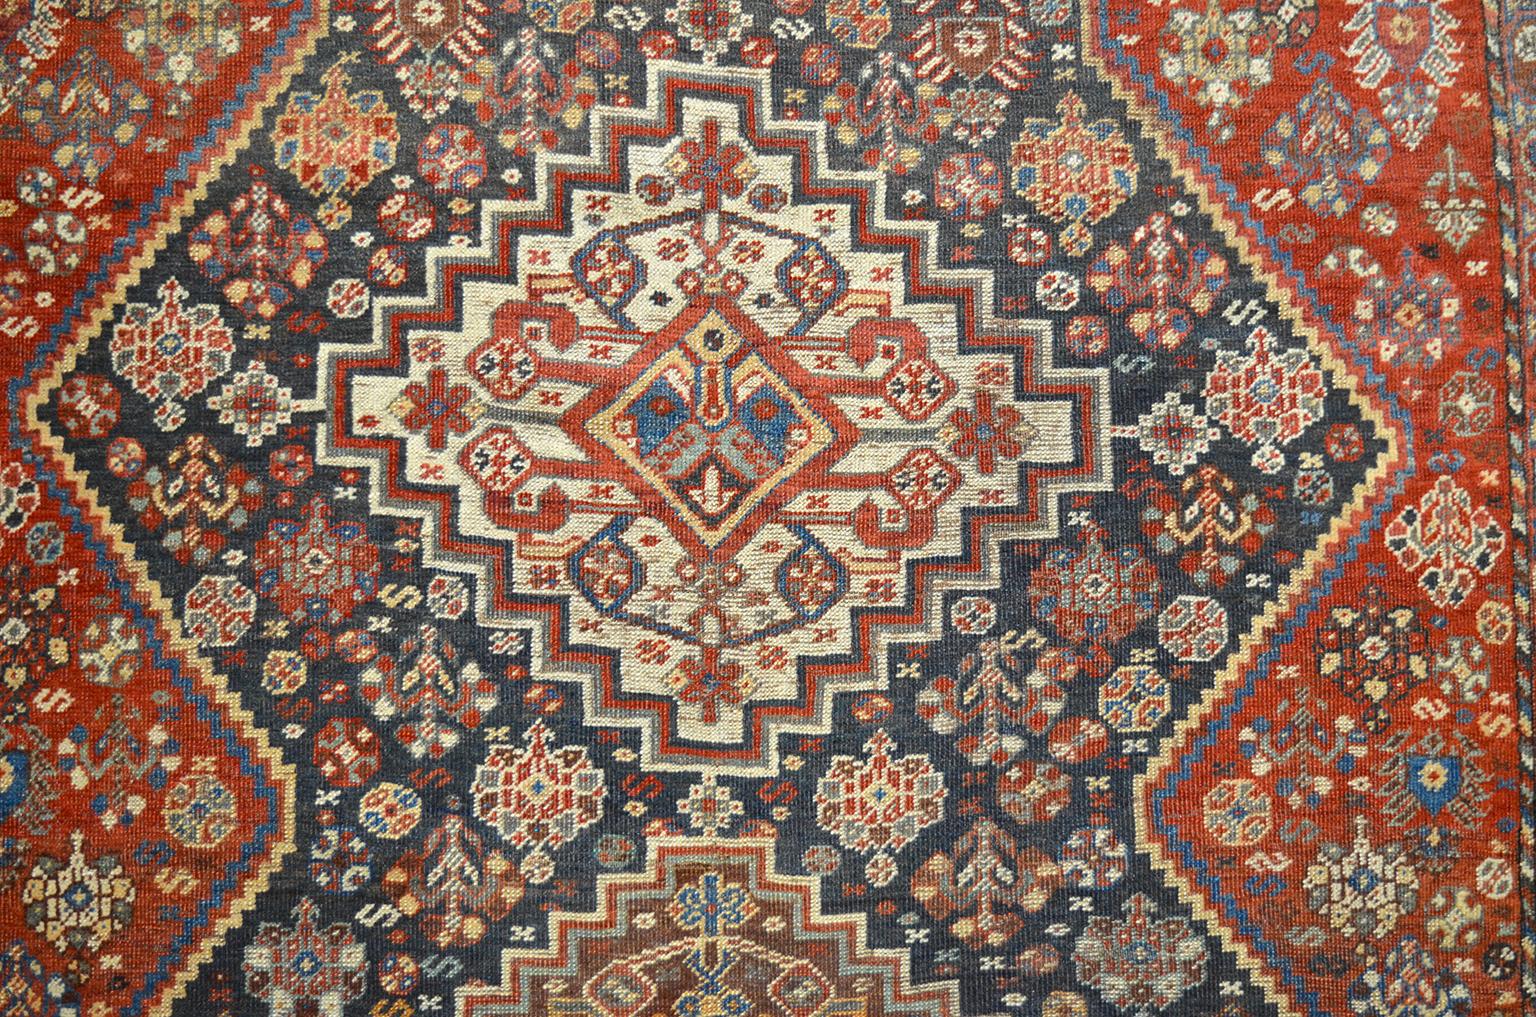 Vegetable Dyed Antique 1880s Persian Qashqai Rug, 5' x 6' For Sale